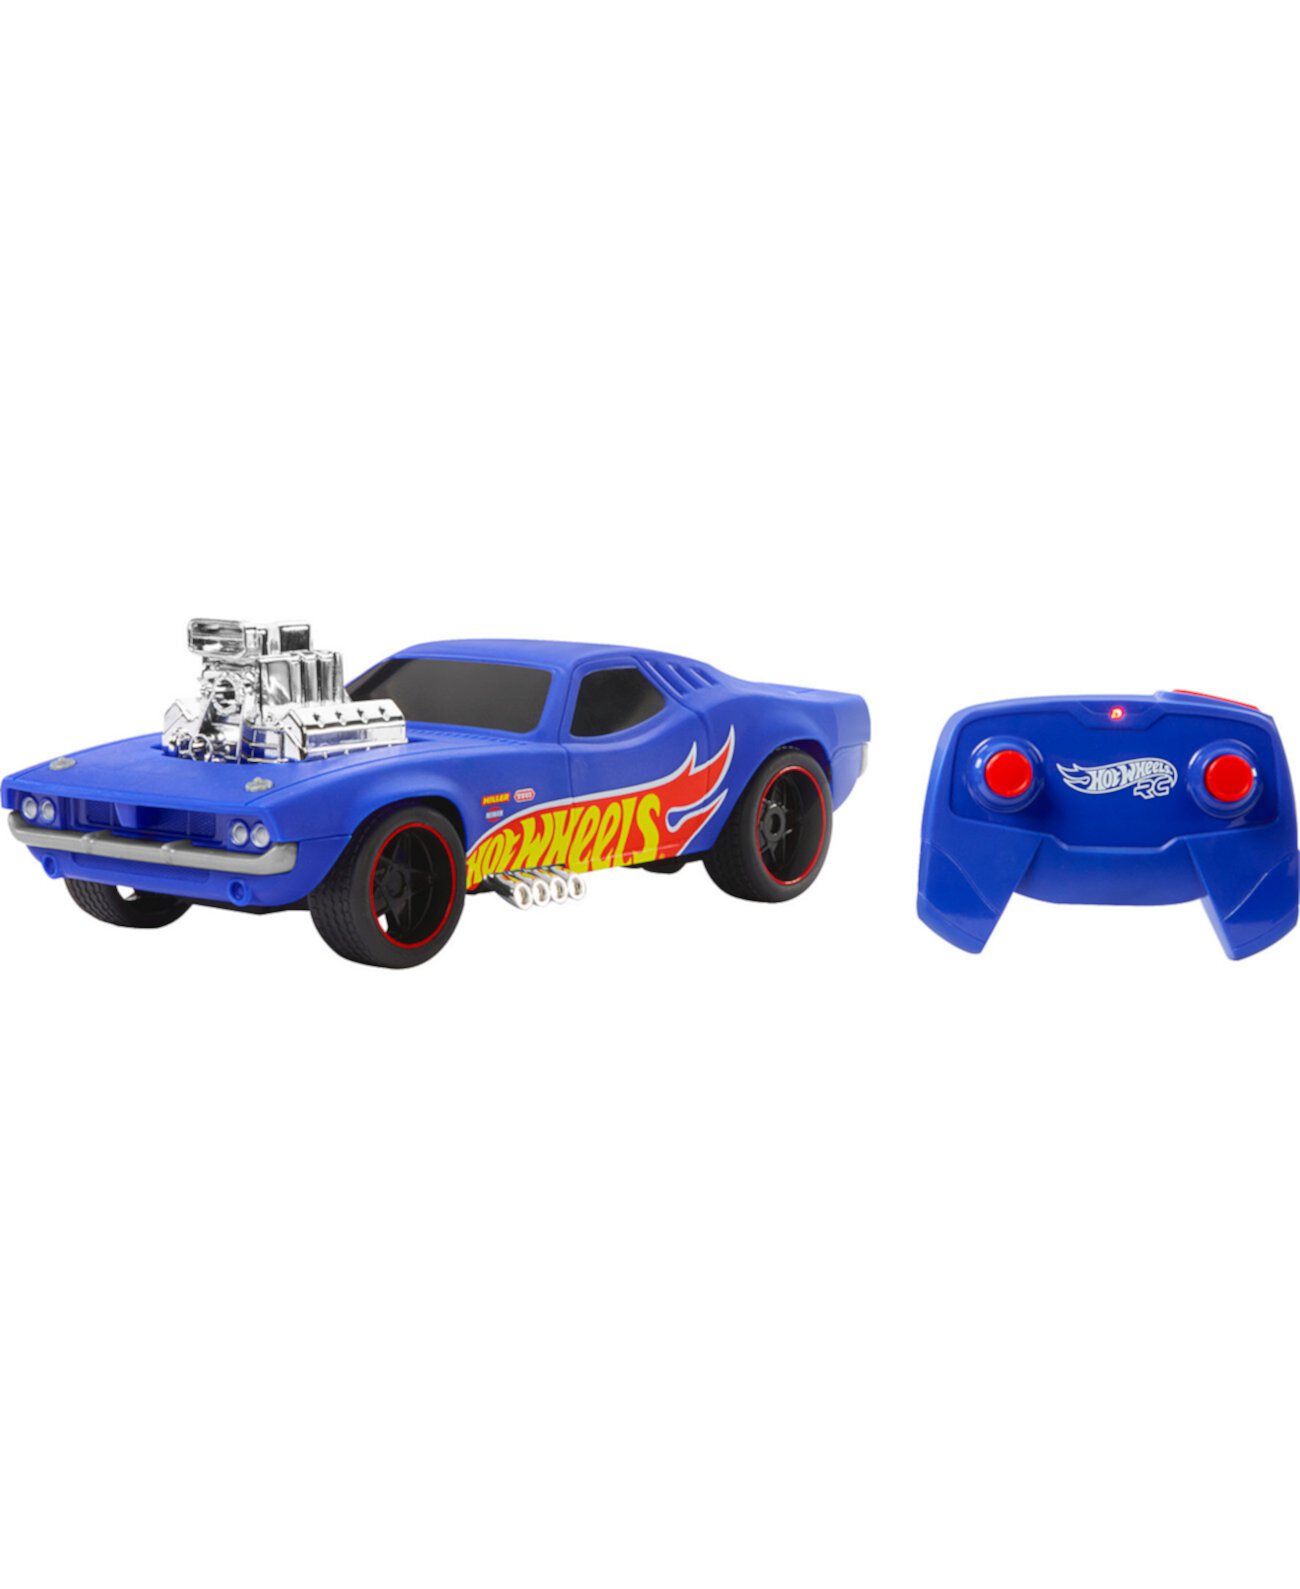 1:16 Scale RC Rodger Dodger USB-Rechargeable Toy Car, Battery-Operated Remote Control Hot Wheels